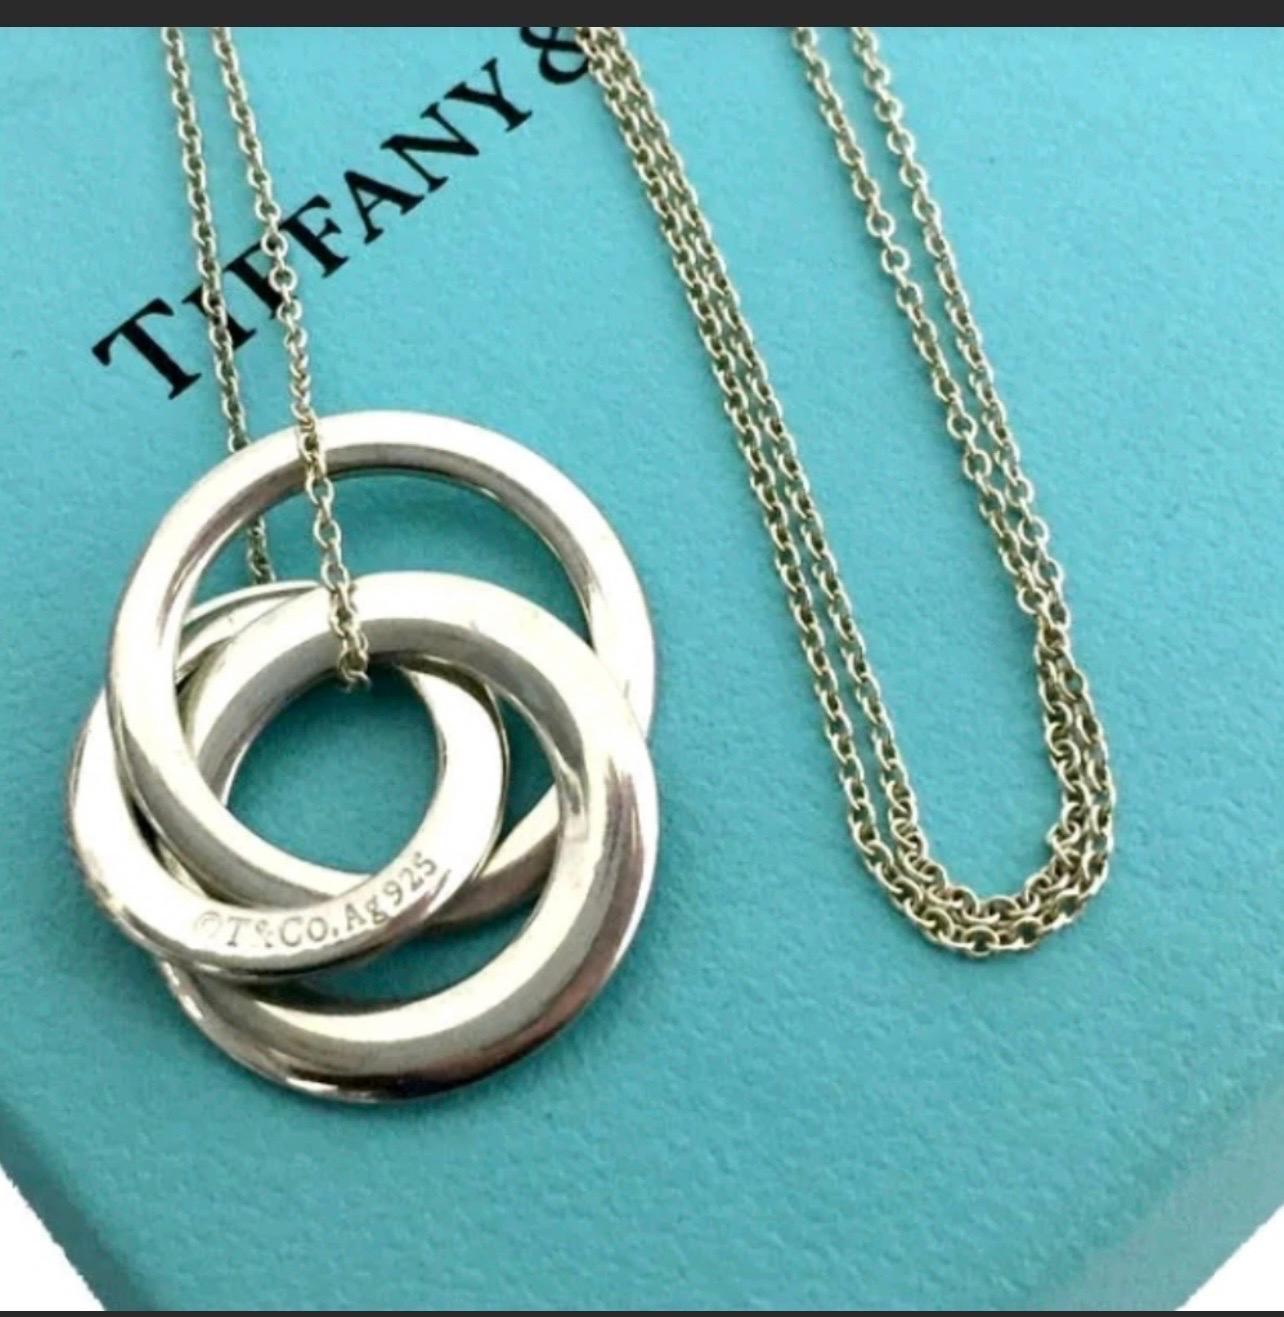 Tiffany & Co 1837 Sterling Silver 3 Interlocking Circles Necklace





This necklace comes complete in a Tiffany & Co pouch presented in a Tiffany & Co gift box and finished with a white ribbon... A perfect gift!!



This is a specially 